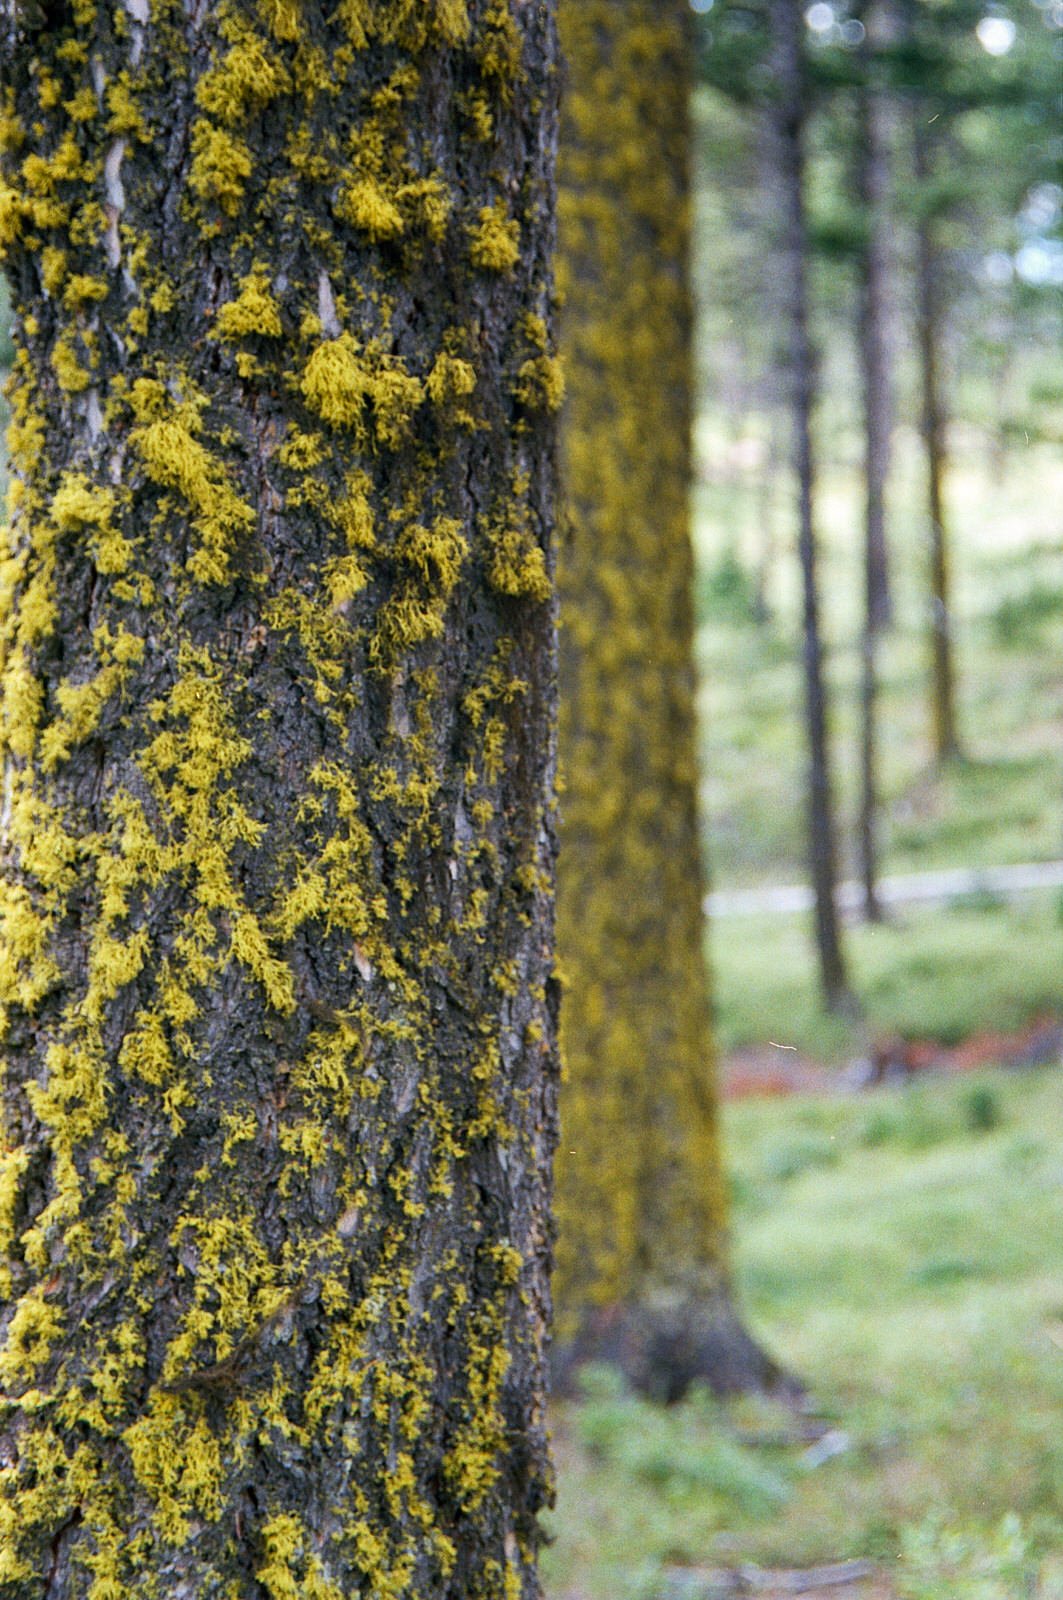 Lichen covered many of the trees! I was smitten!